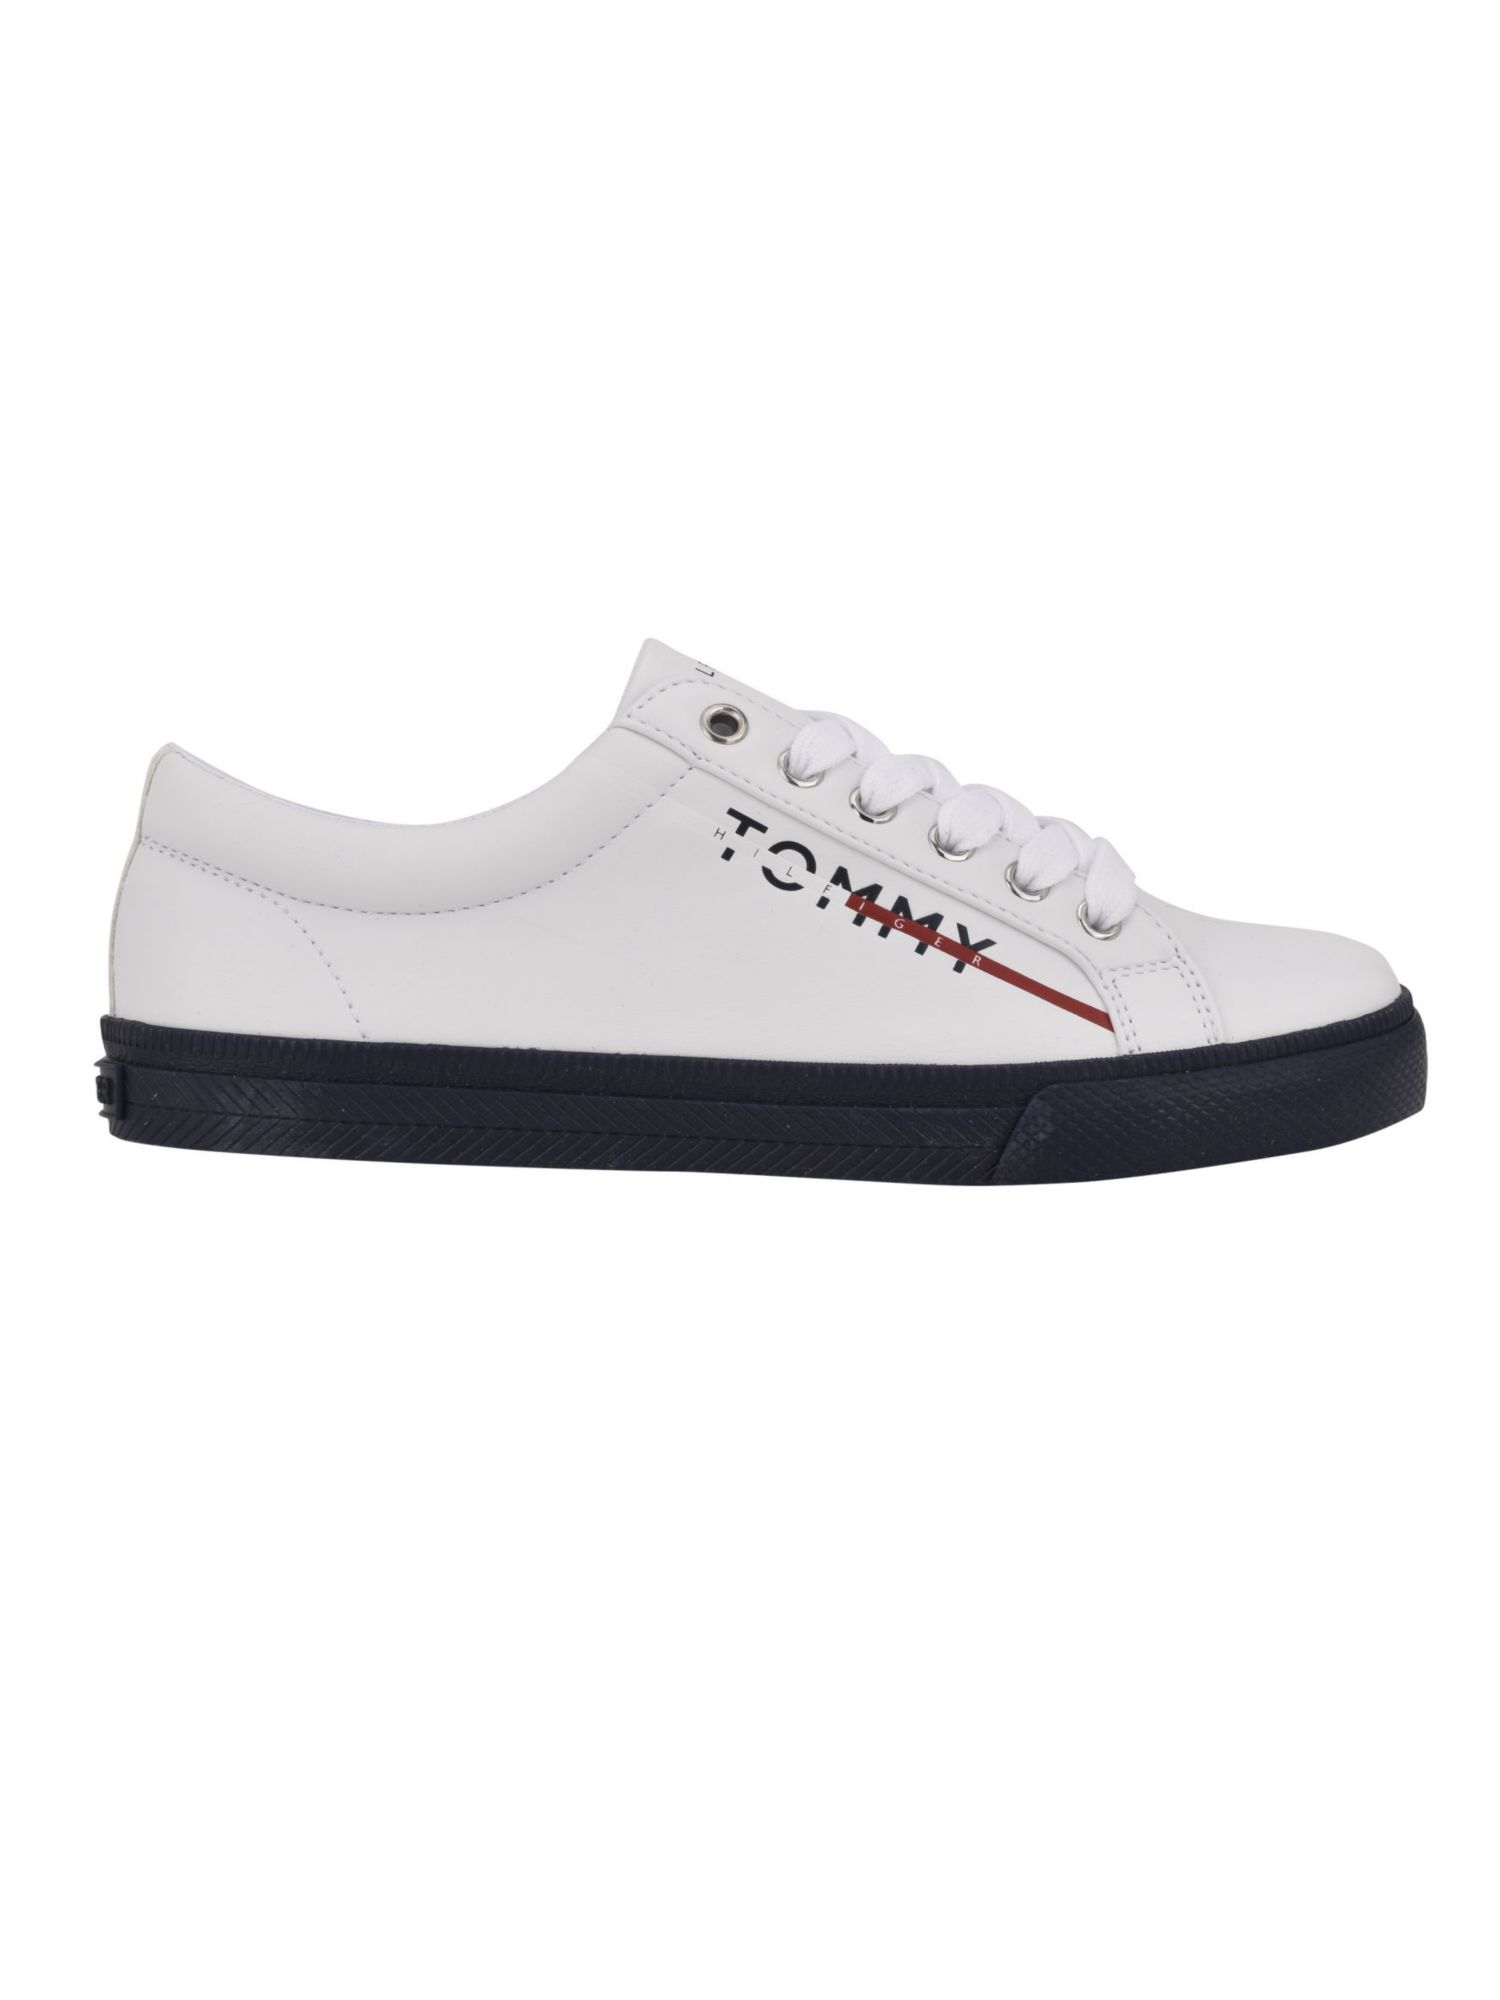 TOMMY HILFIGER Womens White Logo Comfort Luhn Round Toe Lace-Up Sneakers Shoes 9.5 M